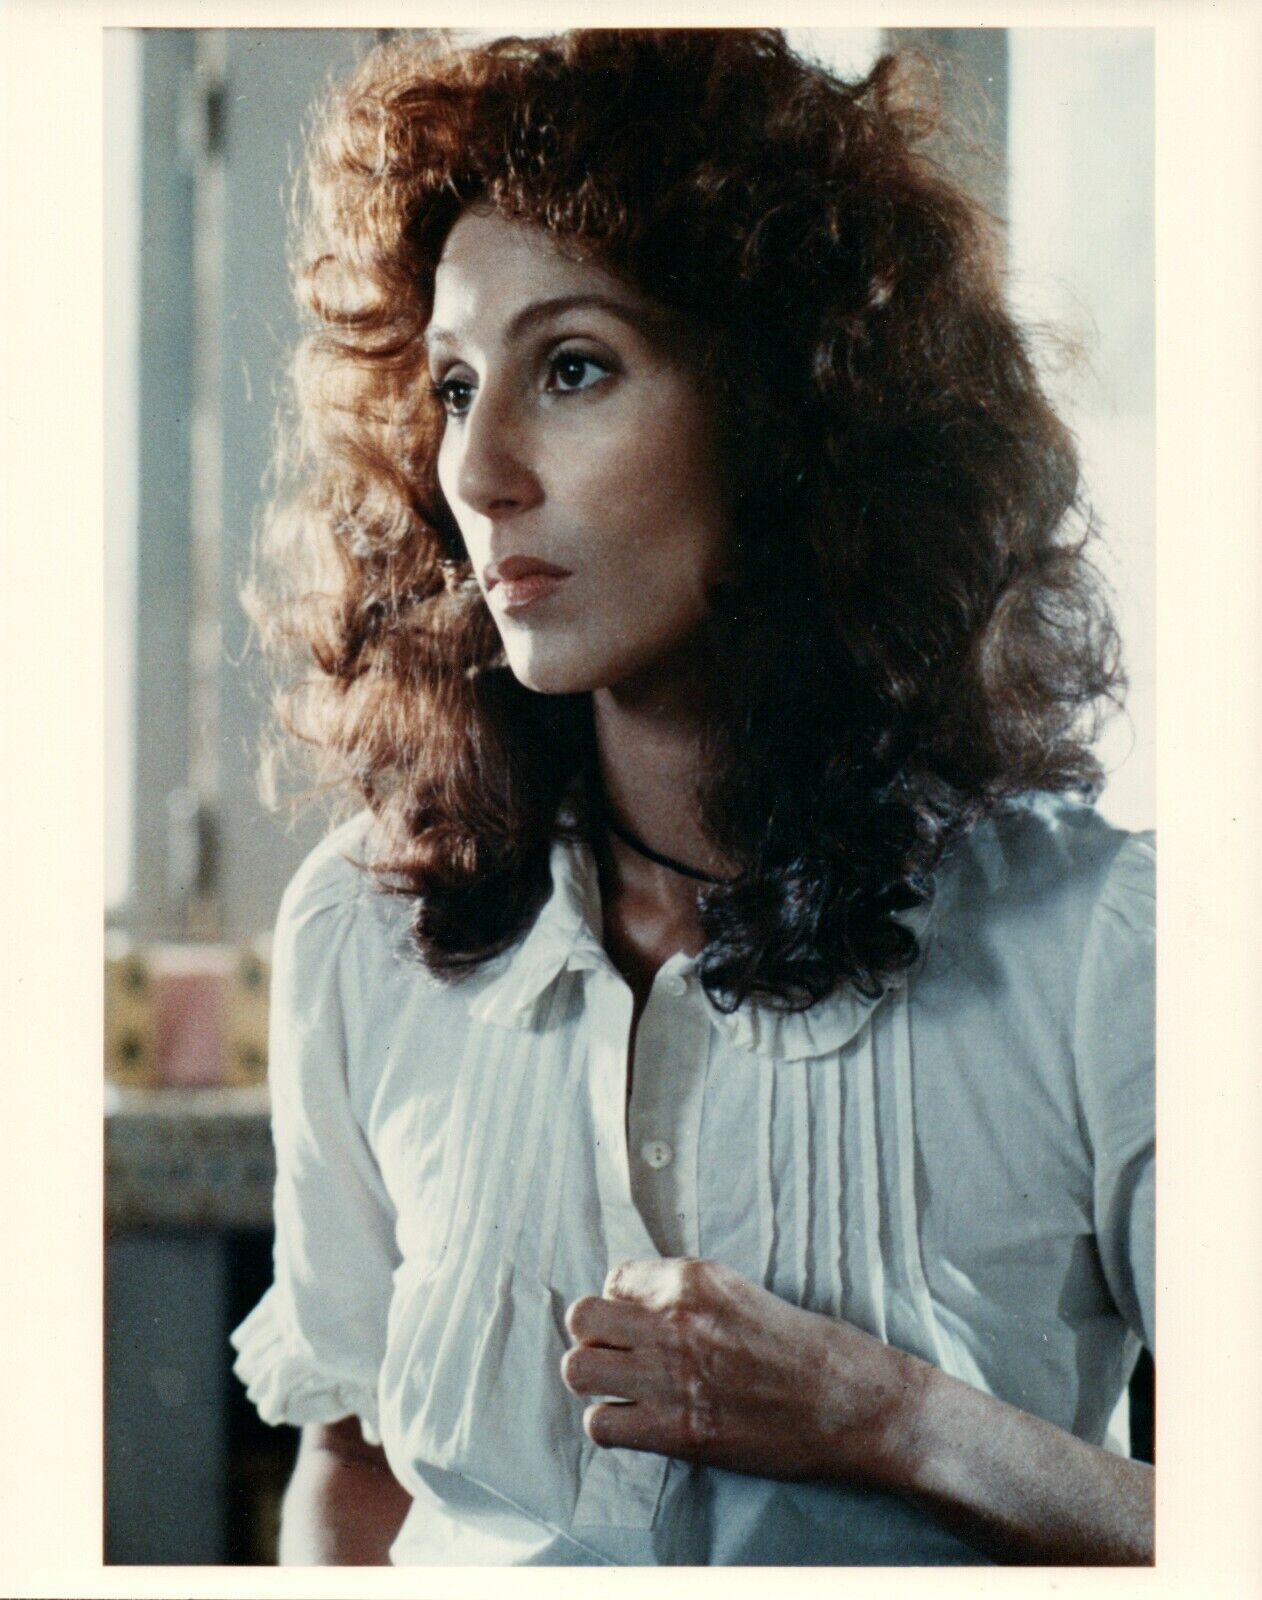 CHER Singer Musician Actress Movie Promo Vintage Photo Poster painting 8x10